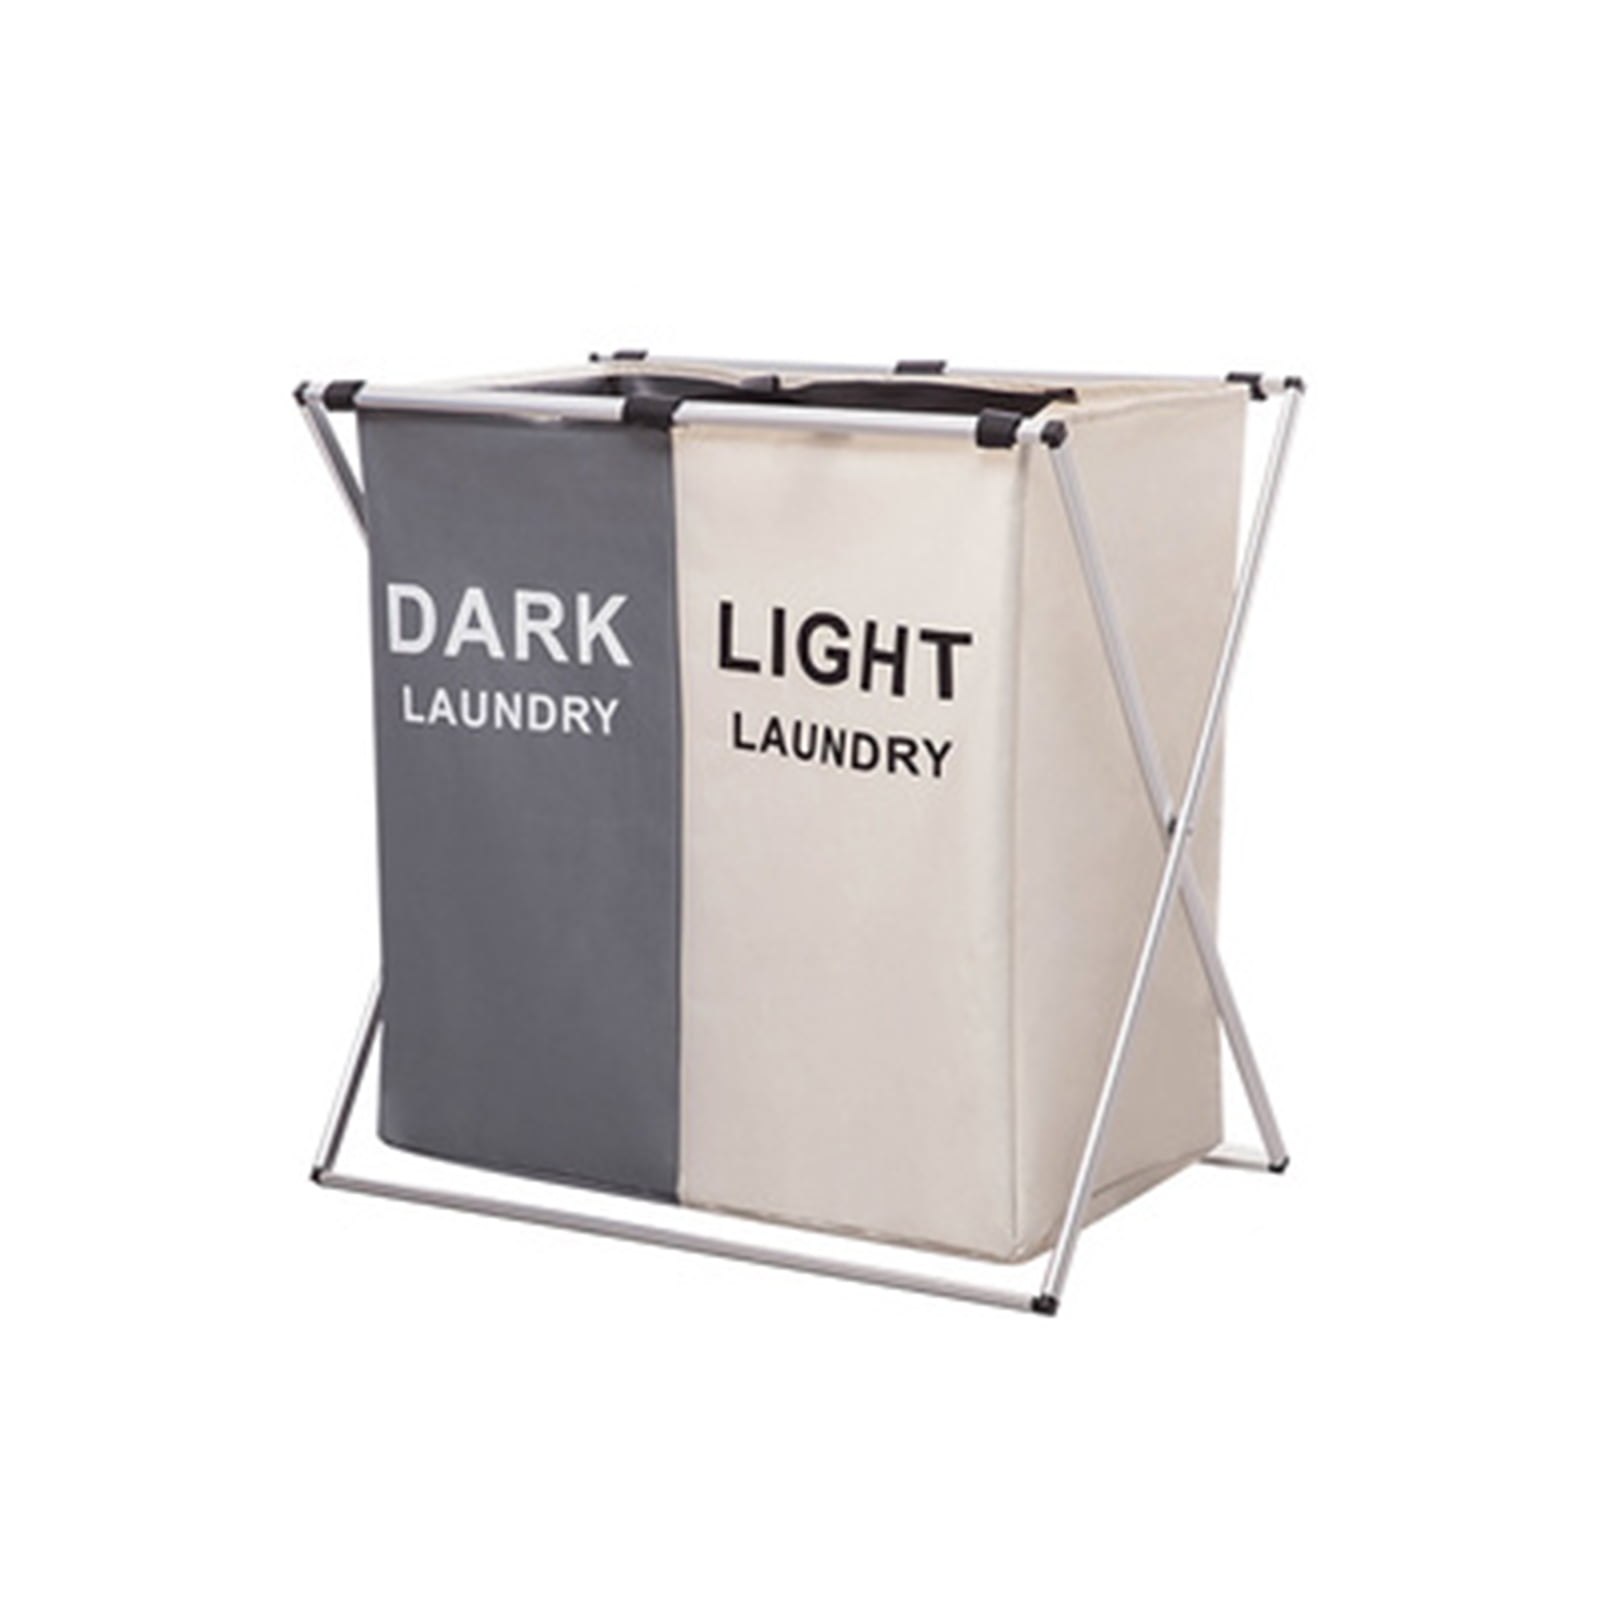 Details about   Waterproof Portable Laundry Basket Oxford Collapsible Metal Dirty Cloth Storage 